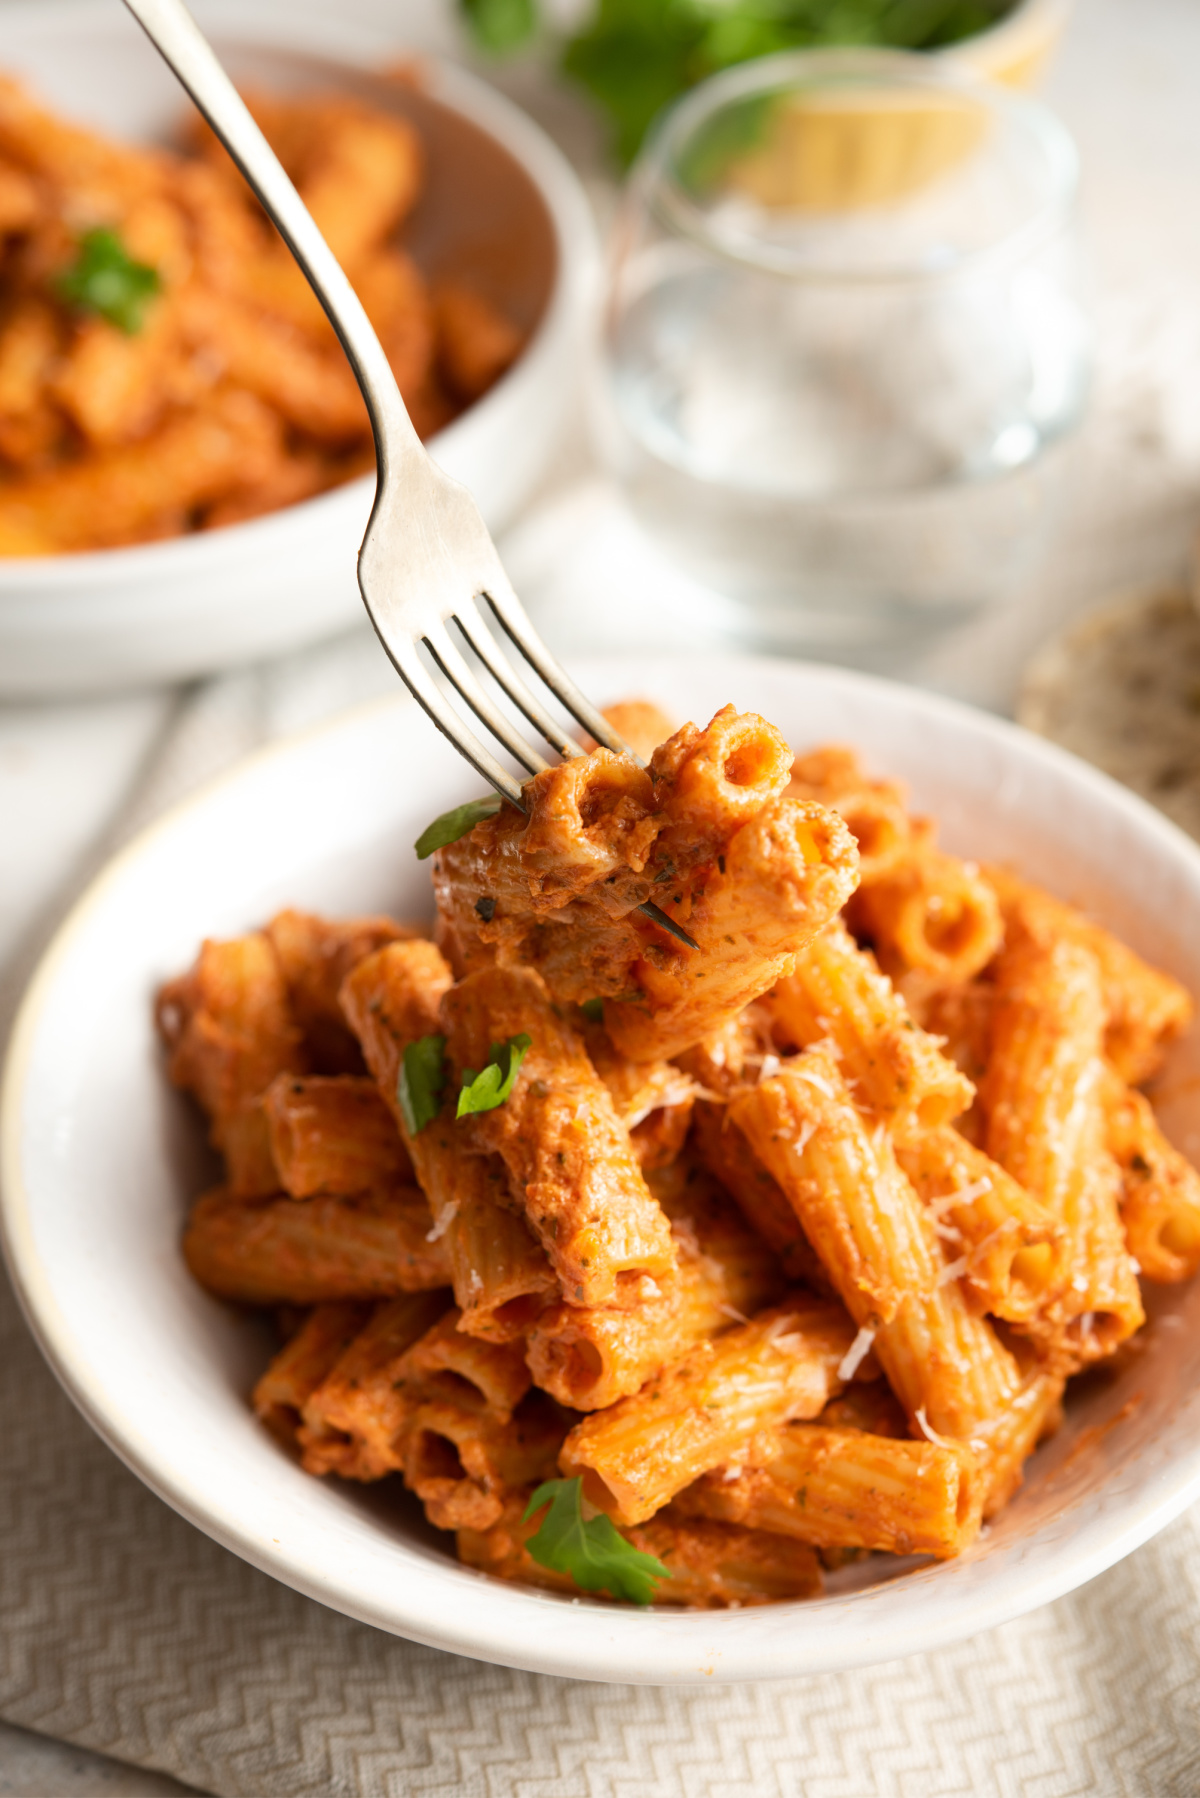 A bowl of cooked rigatoni pasta in a sundried tomato, mascarpone cheese sauce